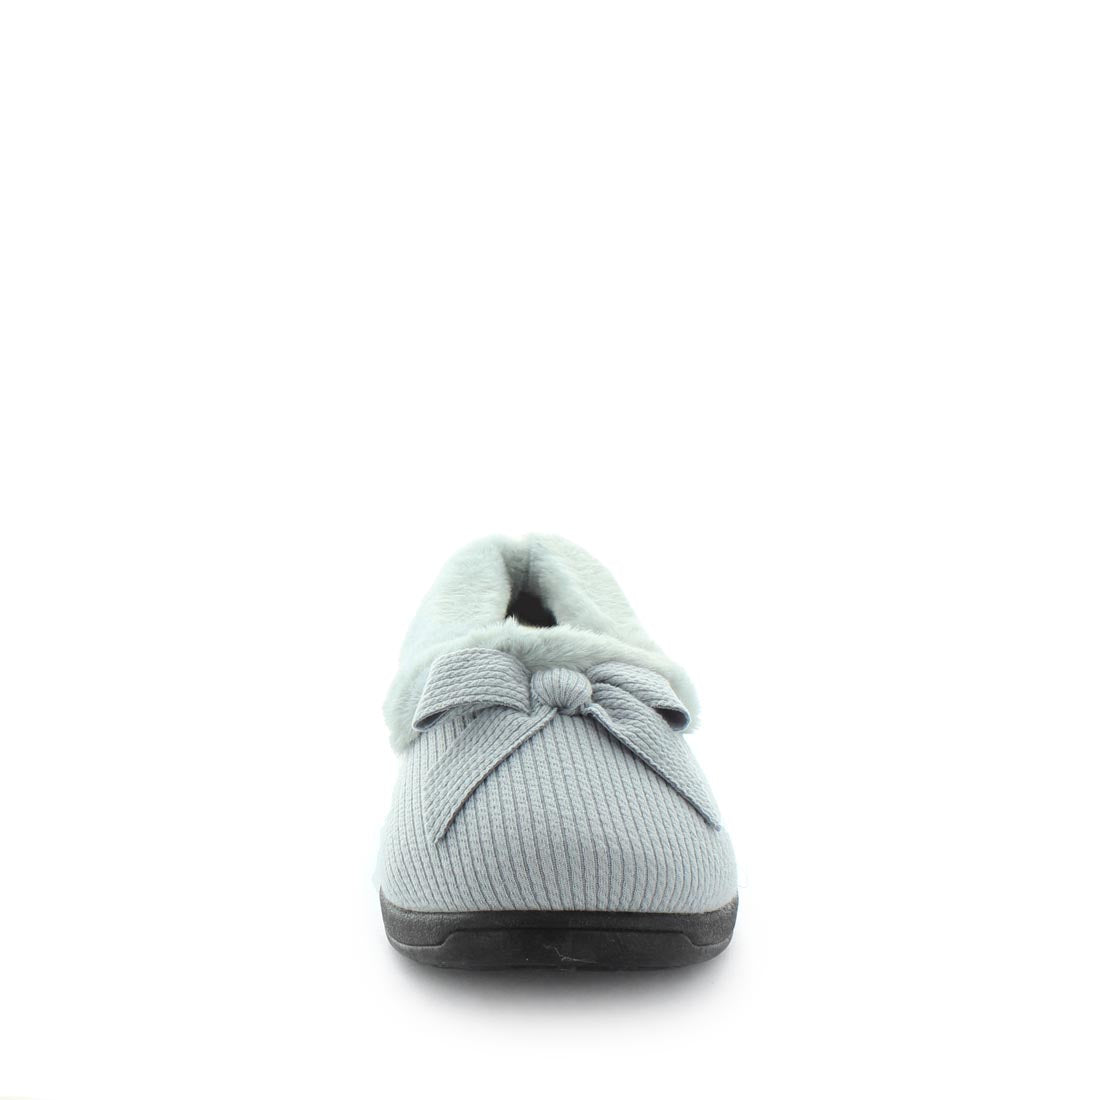 Load image into Gallery viewer, Electra by panda slippers, women&amp;#39;s slippers, women&amp;#39;s comfort slippers, Ballet slippers with a cute bow like feature, warm lining and sock with a flexible and durable outsole. women&amp;#39;s comfort warm slippers, ladies slippers
